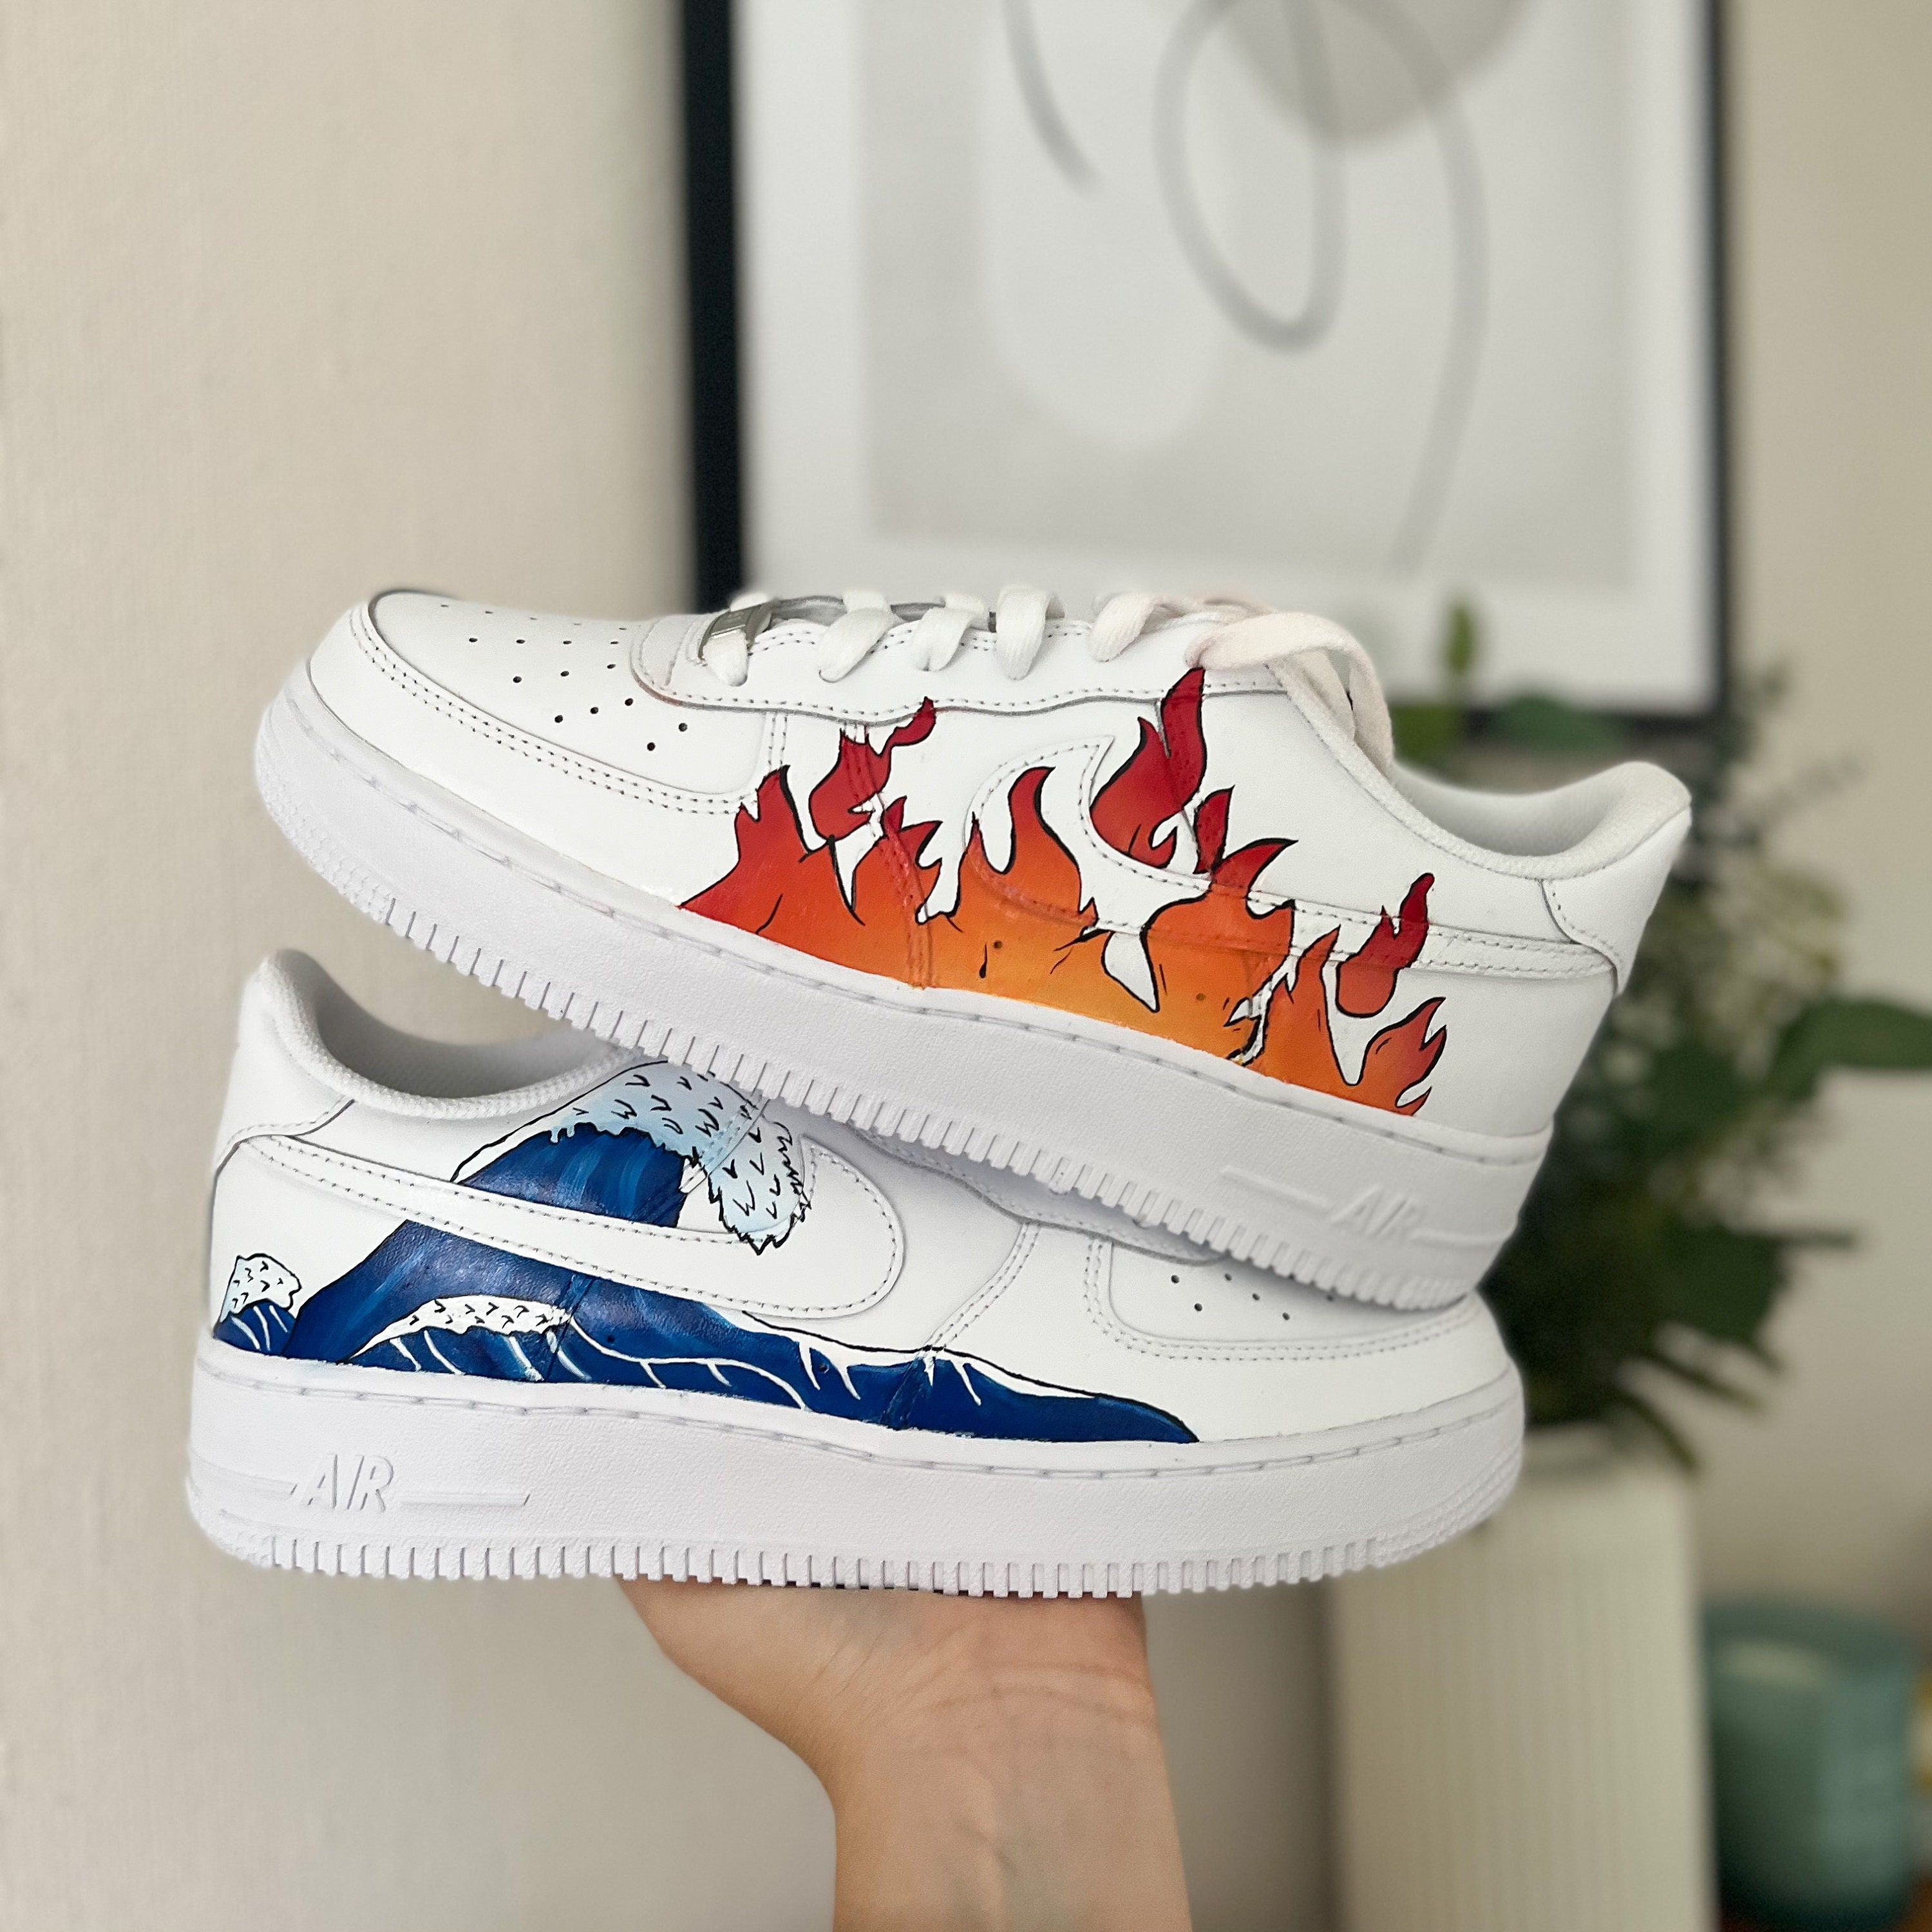 Custom Air Force 1 Fire and Water Wave Design Red Blue Orange - Etsy